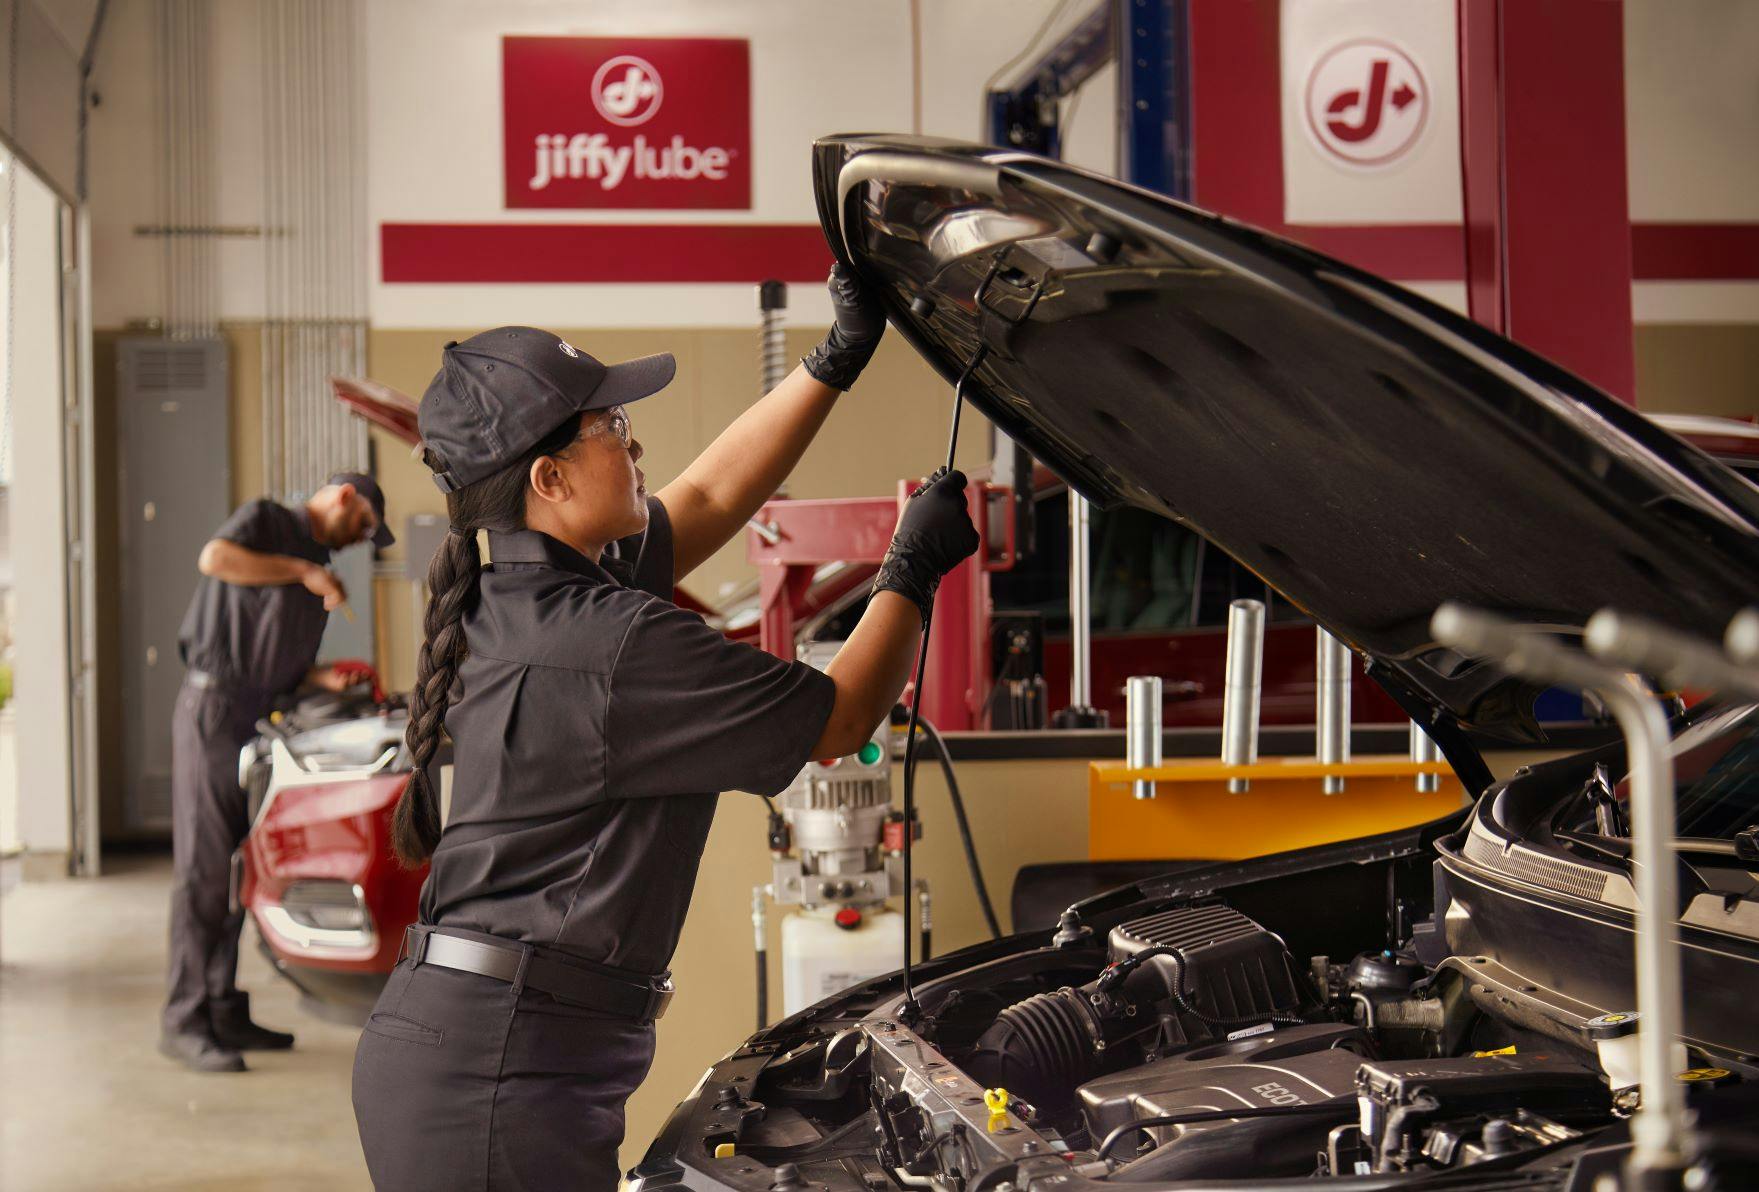 Jiffy Lube technician opening a vehicle's car